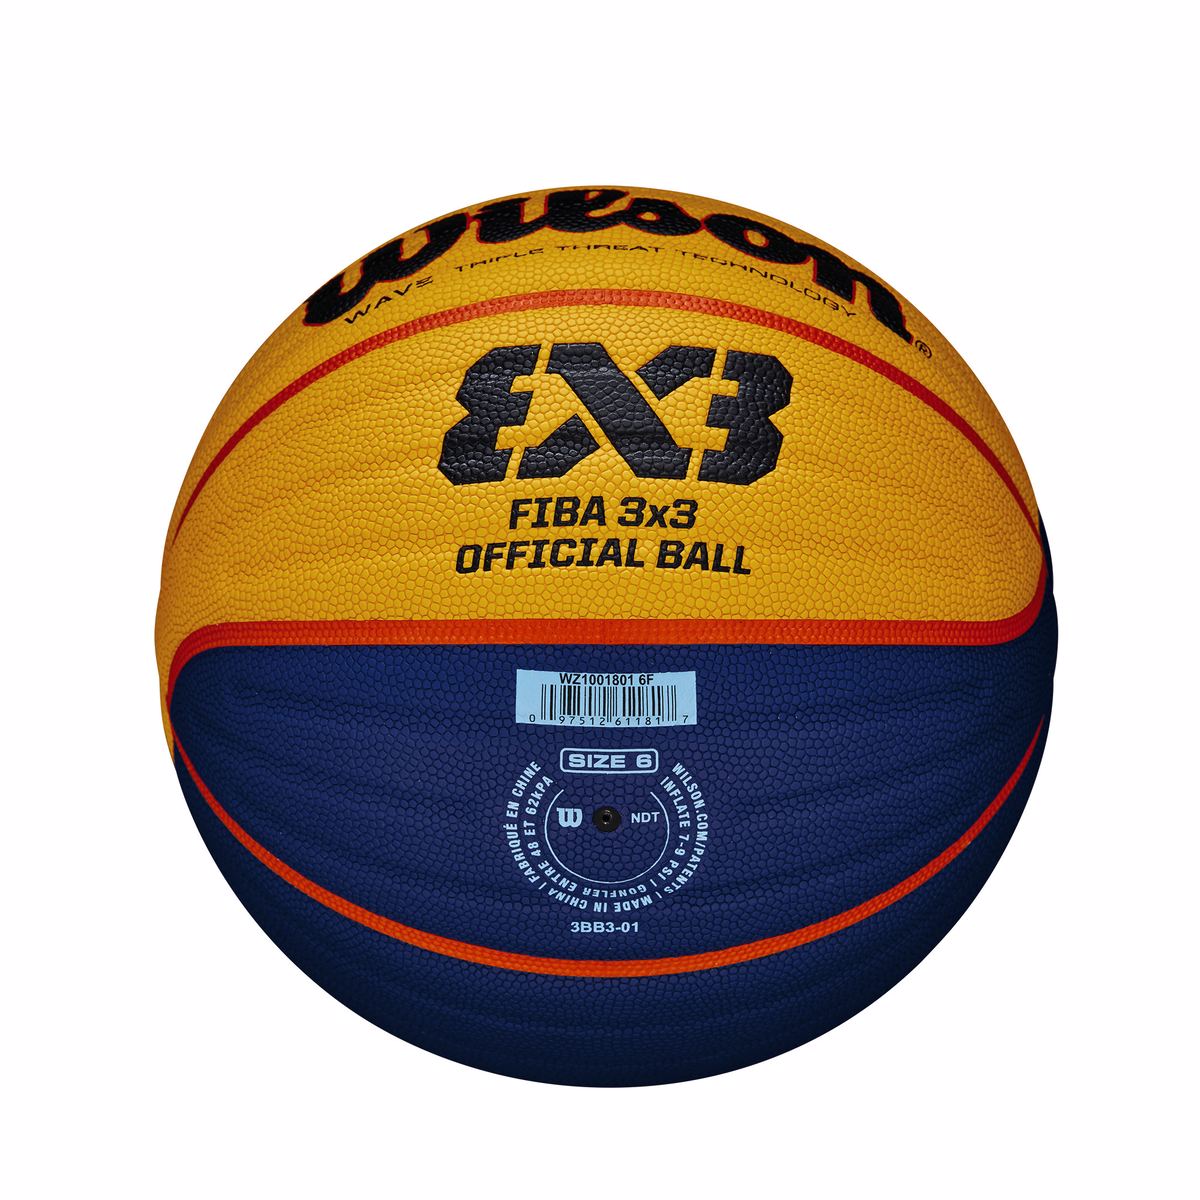 WZ1001801XB_5_6F_FIBA_3X3_Unit_Win_Together_Official_BL_YE_BU_OR.png.high-res_1200x1200